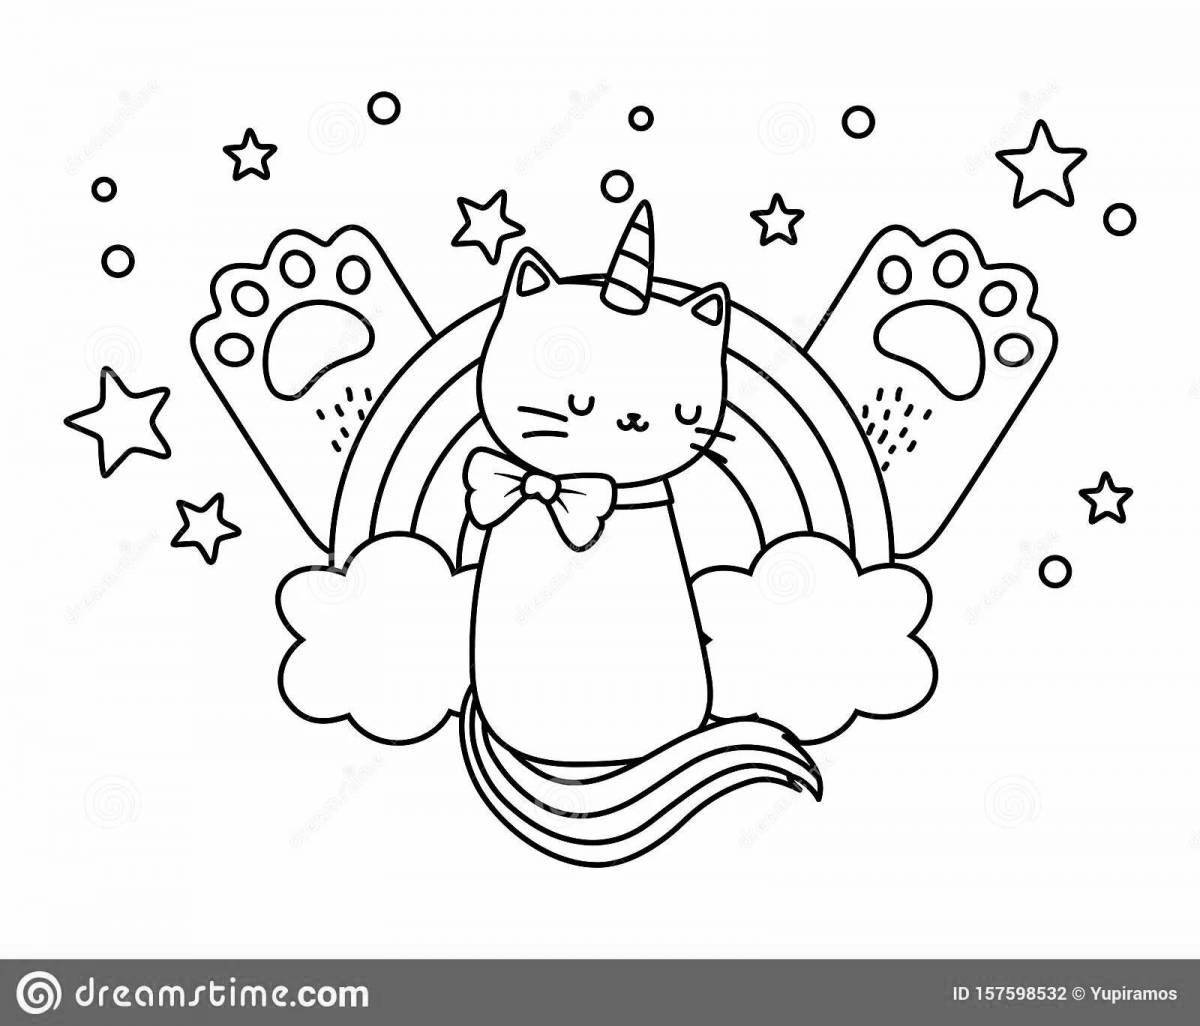 Adorable rainbow cat coloring page